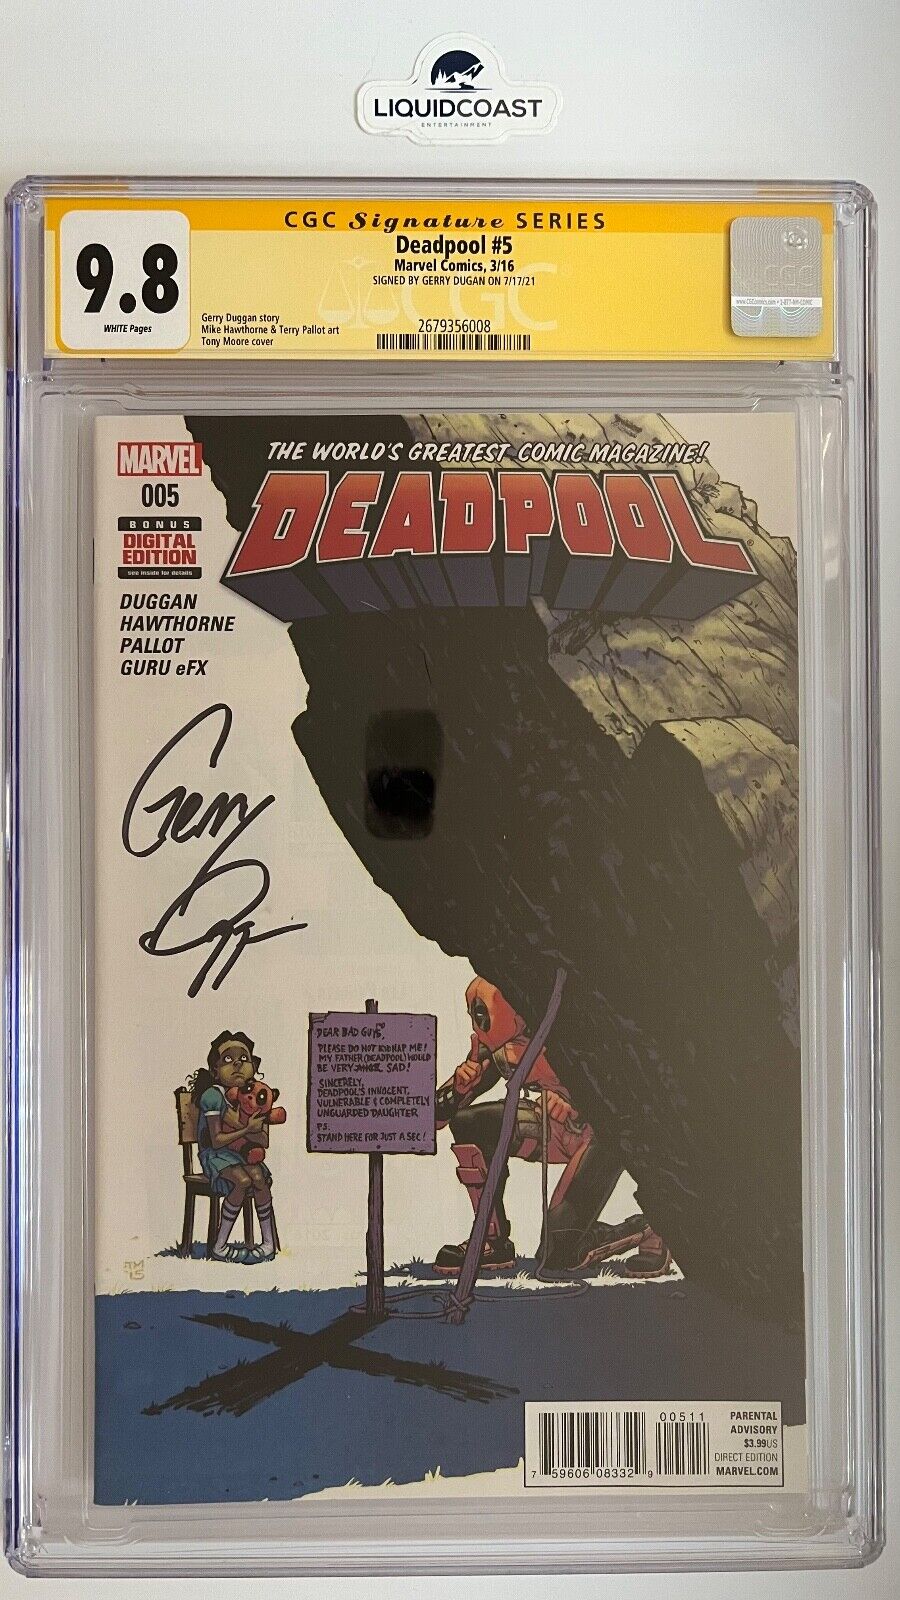 Deadpool #5 SS CGC 9.8 Signed by Gerry Dugan